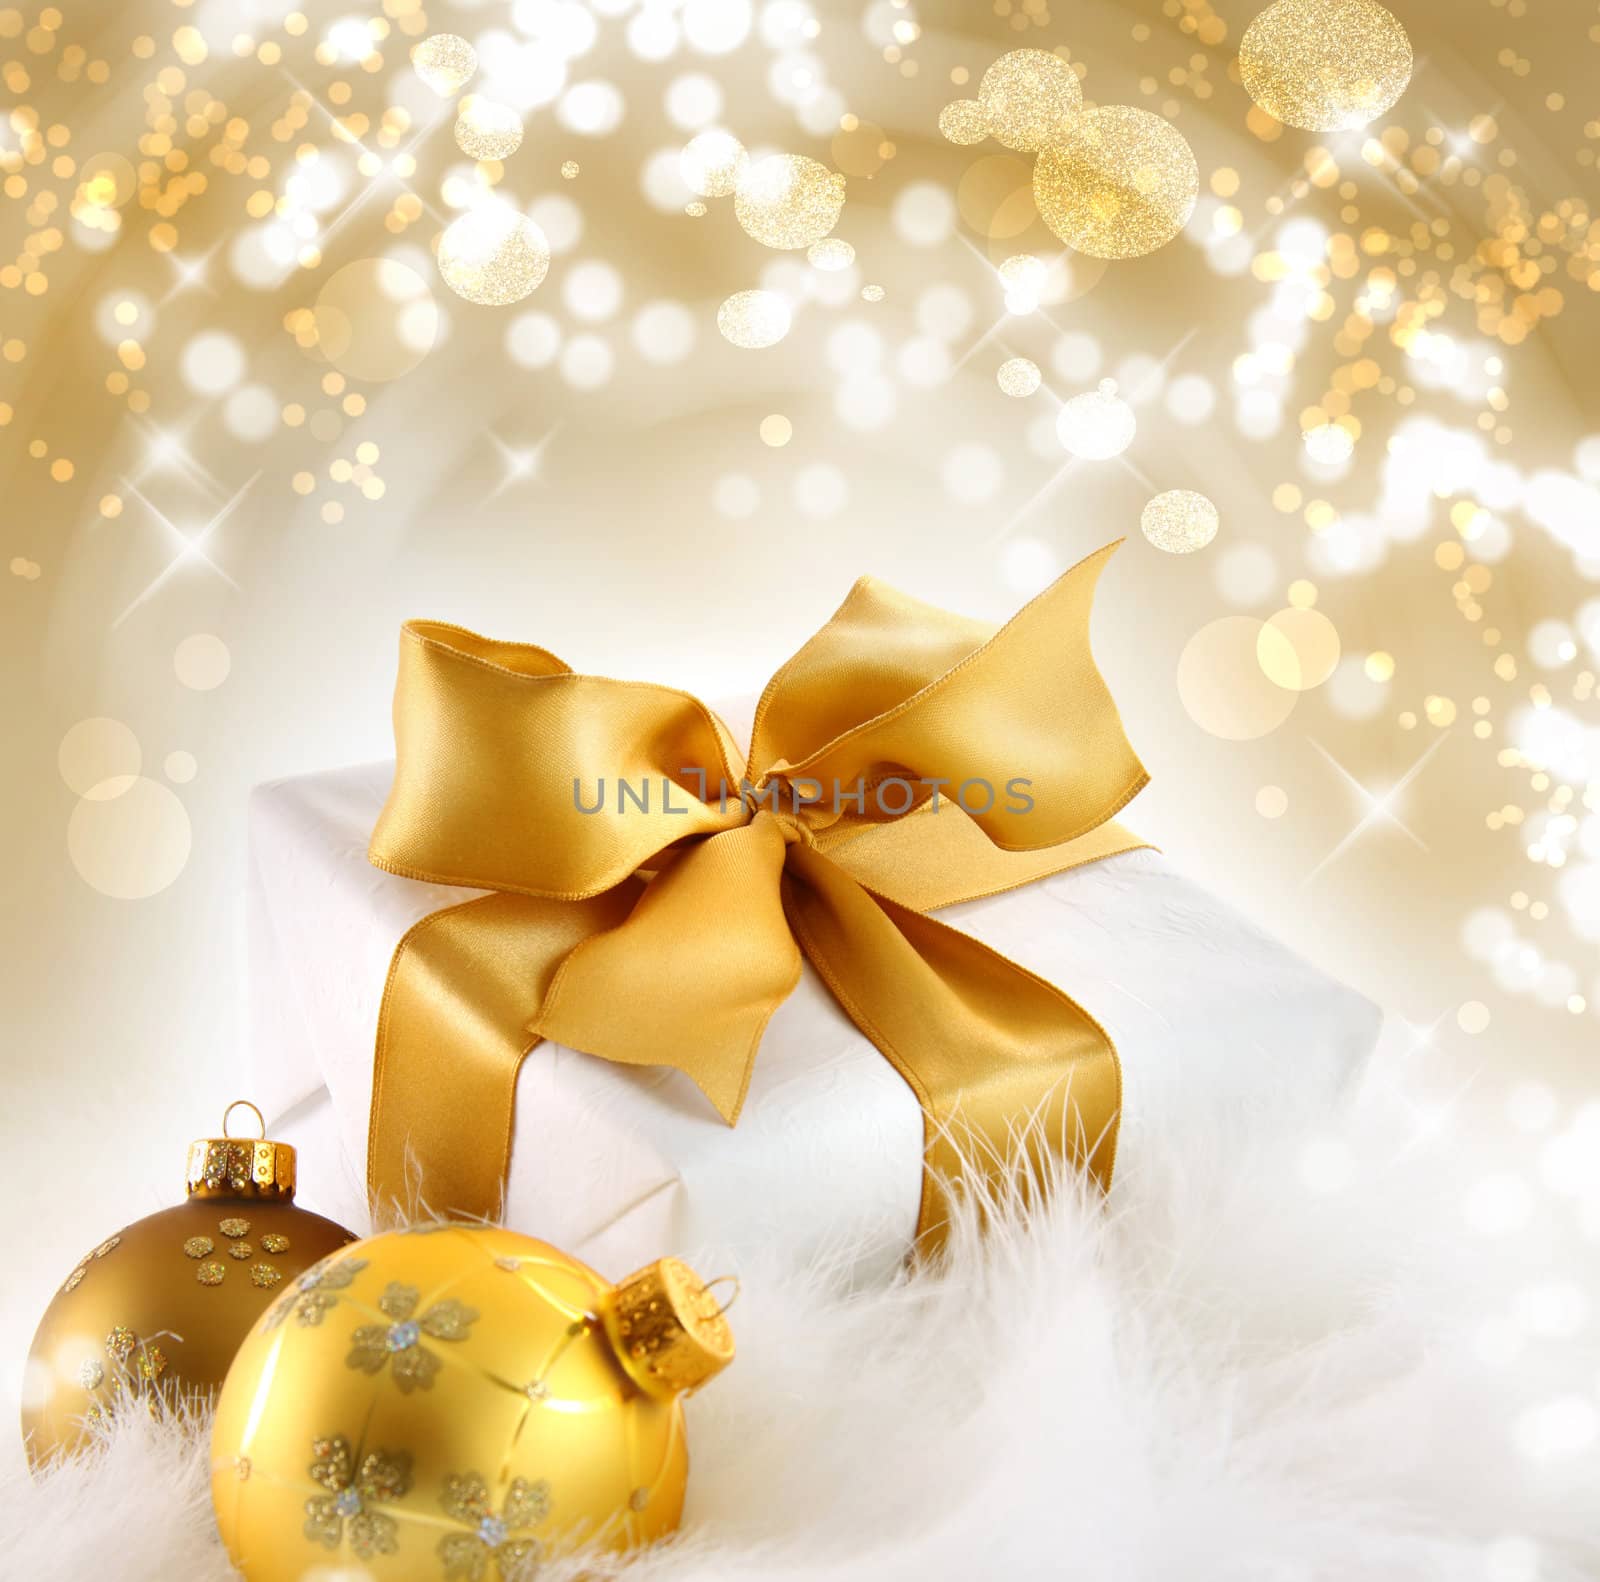 Gold ribboned gift with holiday background by Sandralise